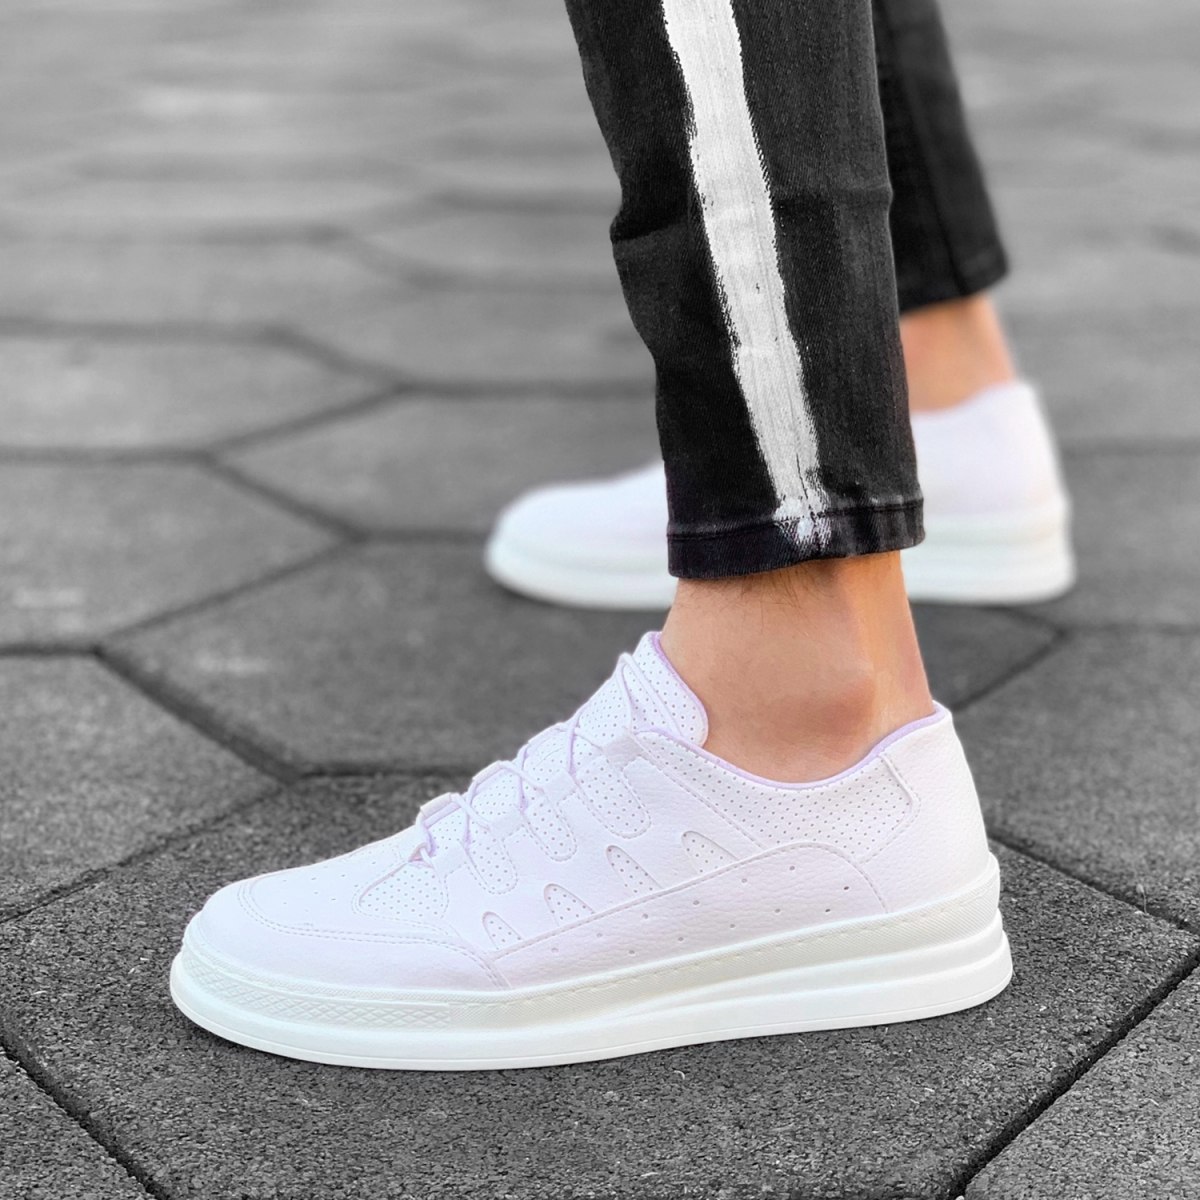 Mens Full Dotted Summer Sneakers White